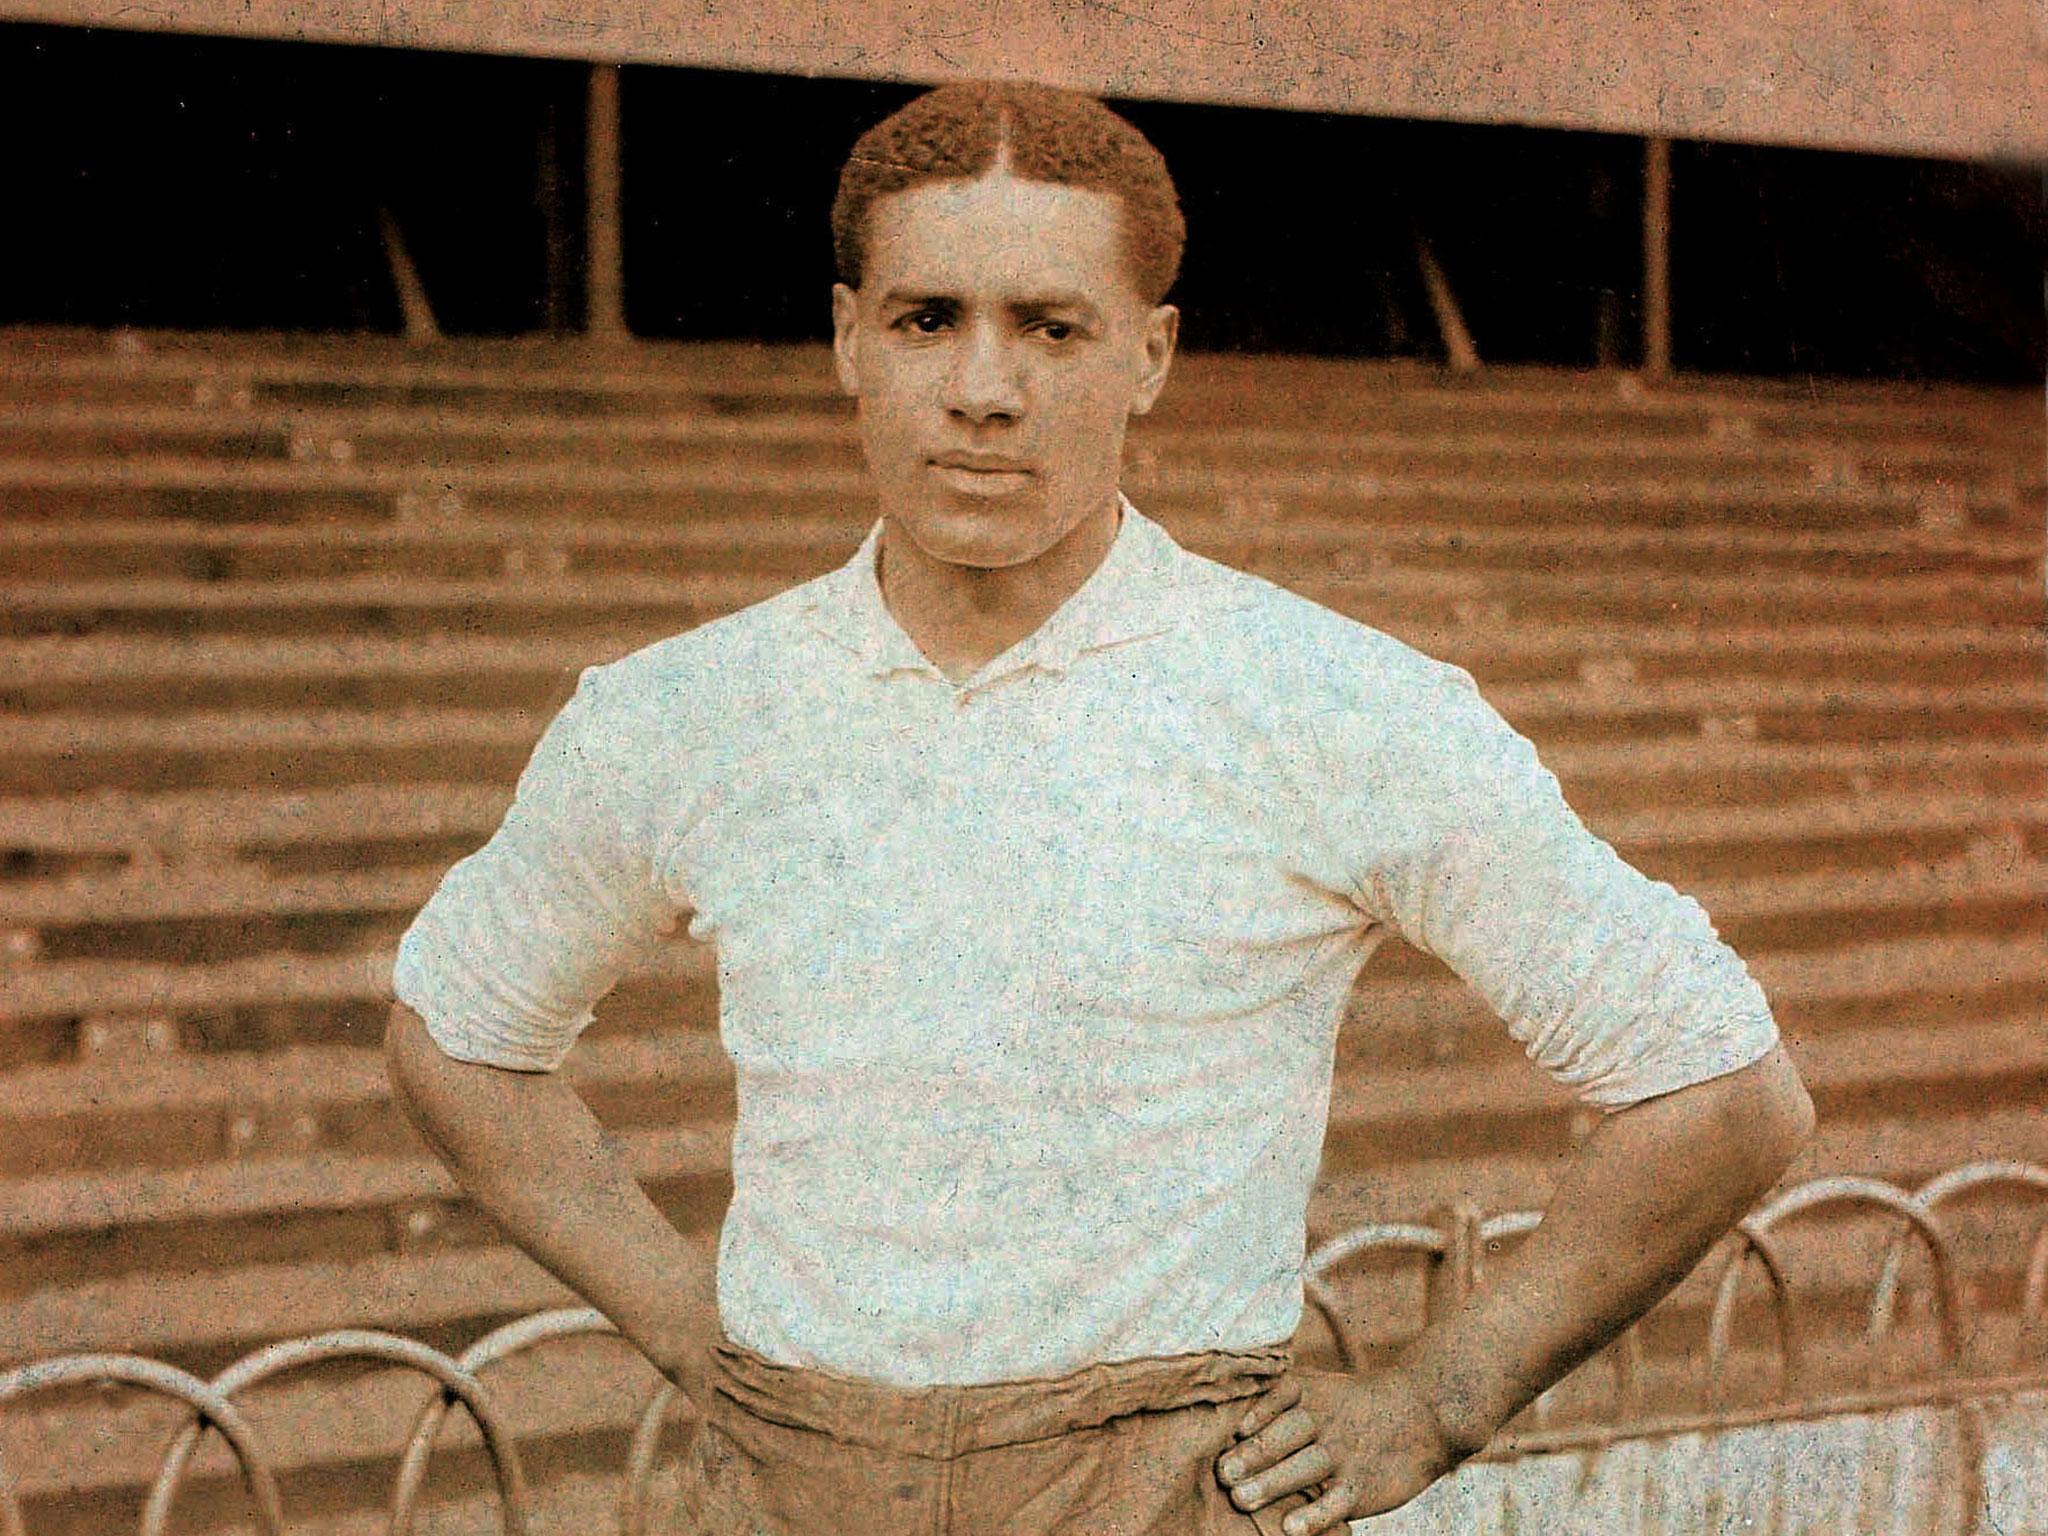 Walter Tull spent his whole life breaking down walls - it&apos;s time he was properly acknowledged and we learn from his tale